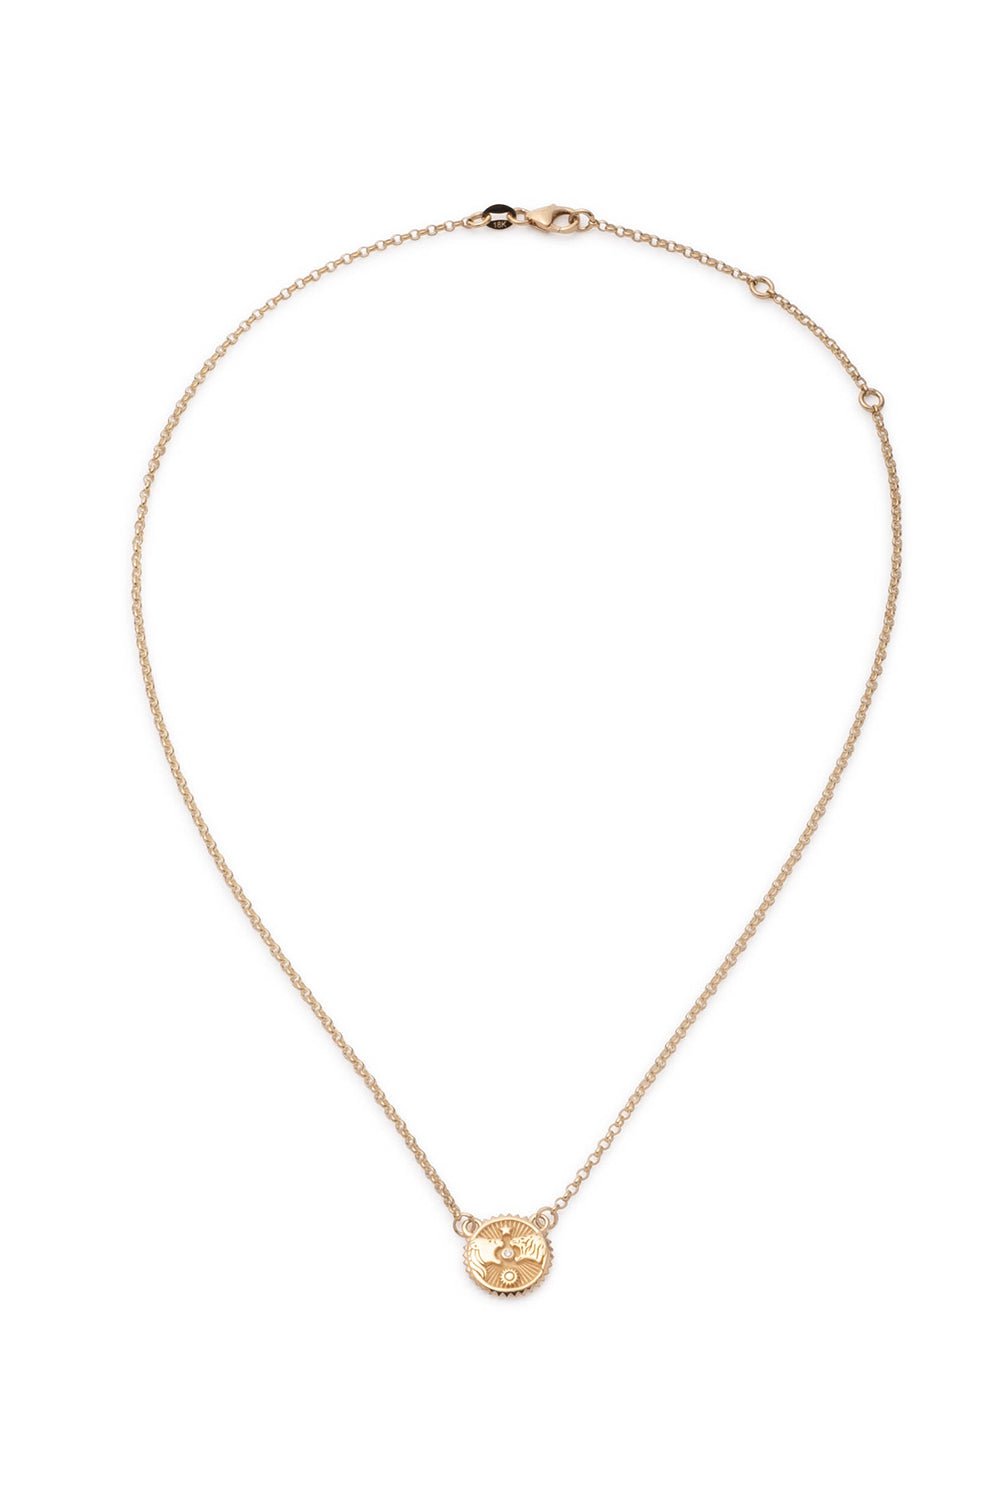 FOUNDRAE-Strength - Mini Stationary Necklace-YELLOW GOLD